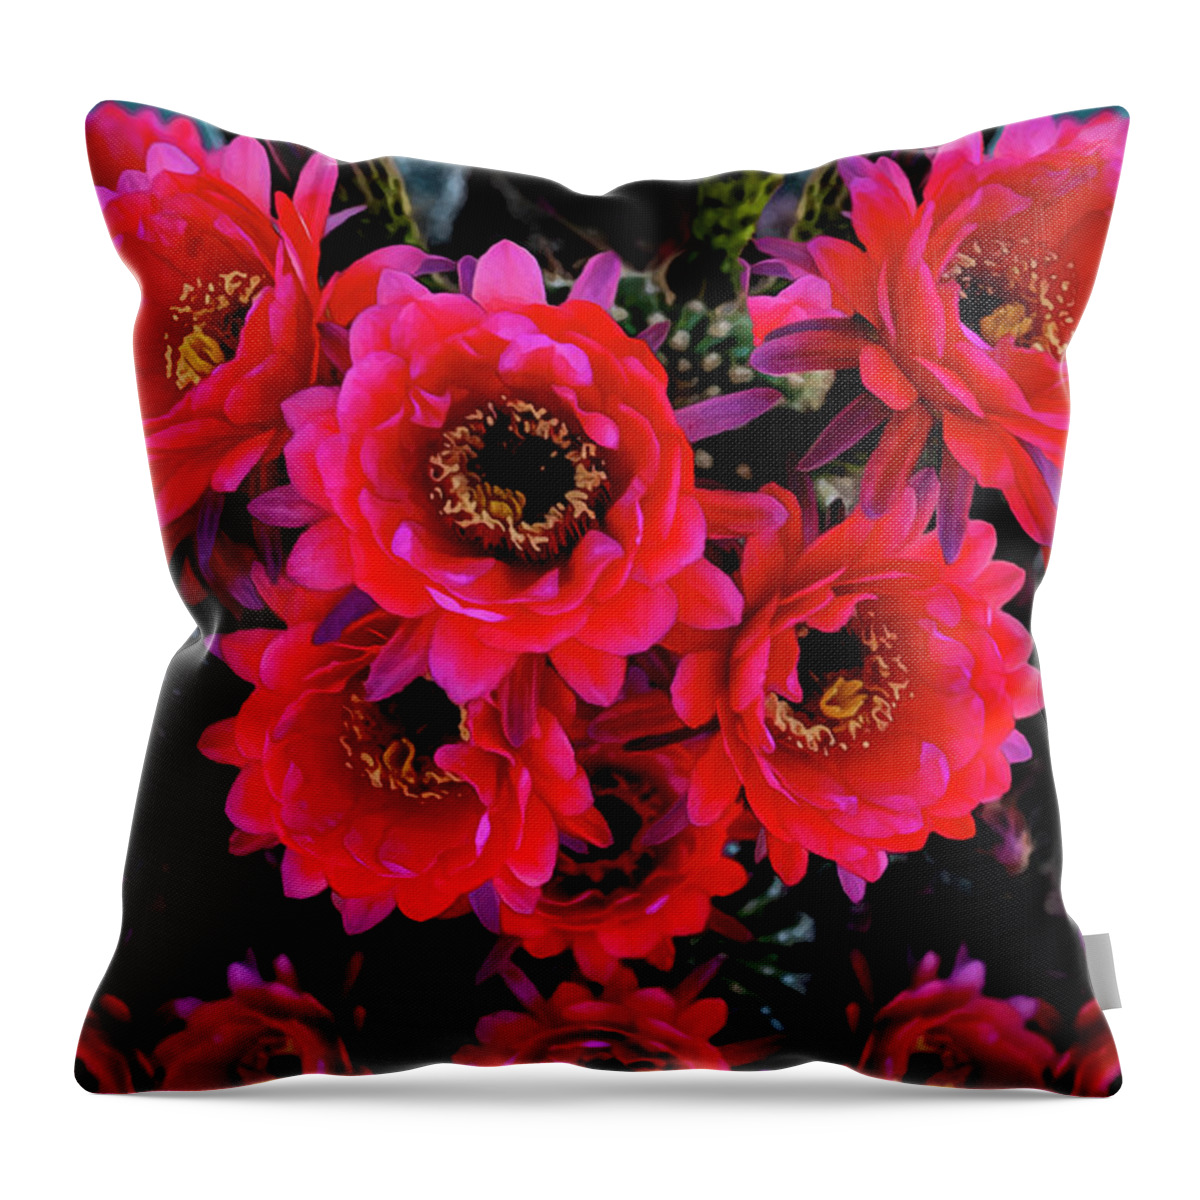 Cactus Throw Pillow featuring the photograph Cactus Flower Paintography by Anthony Jones